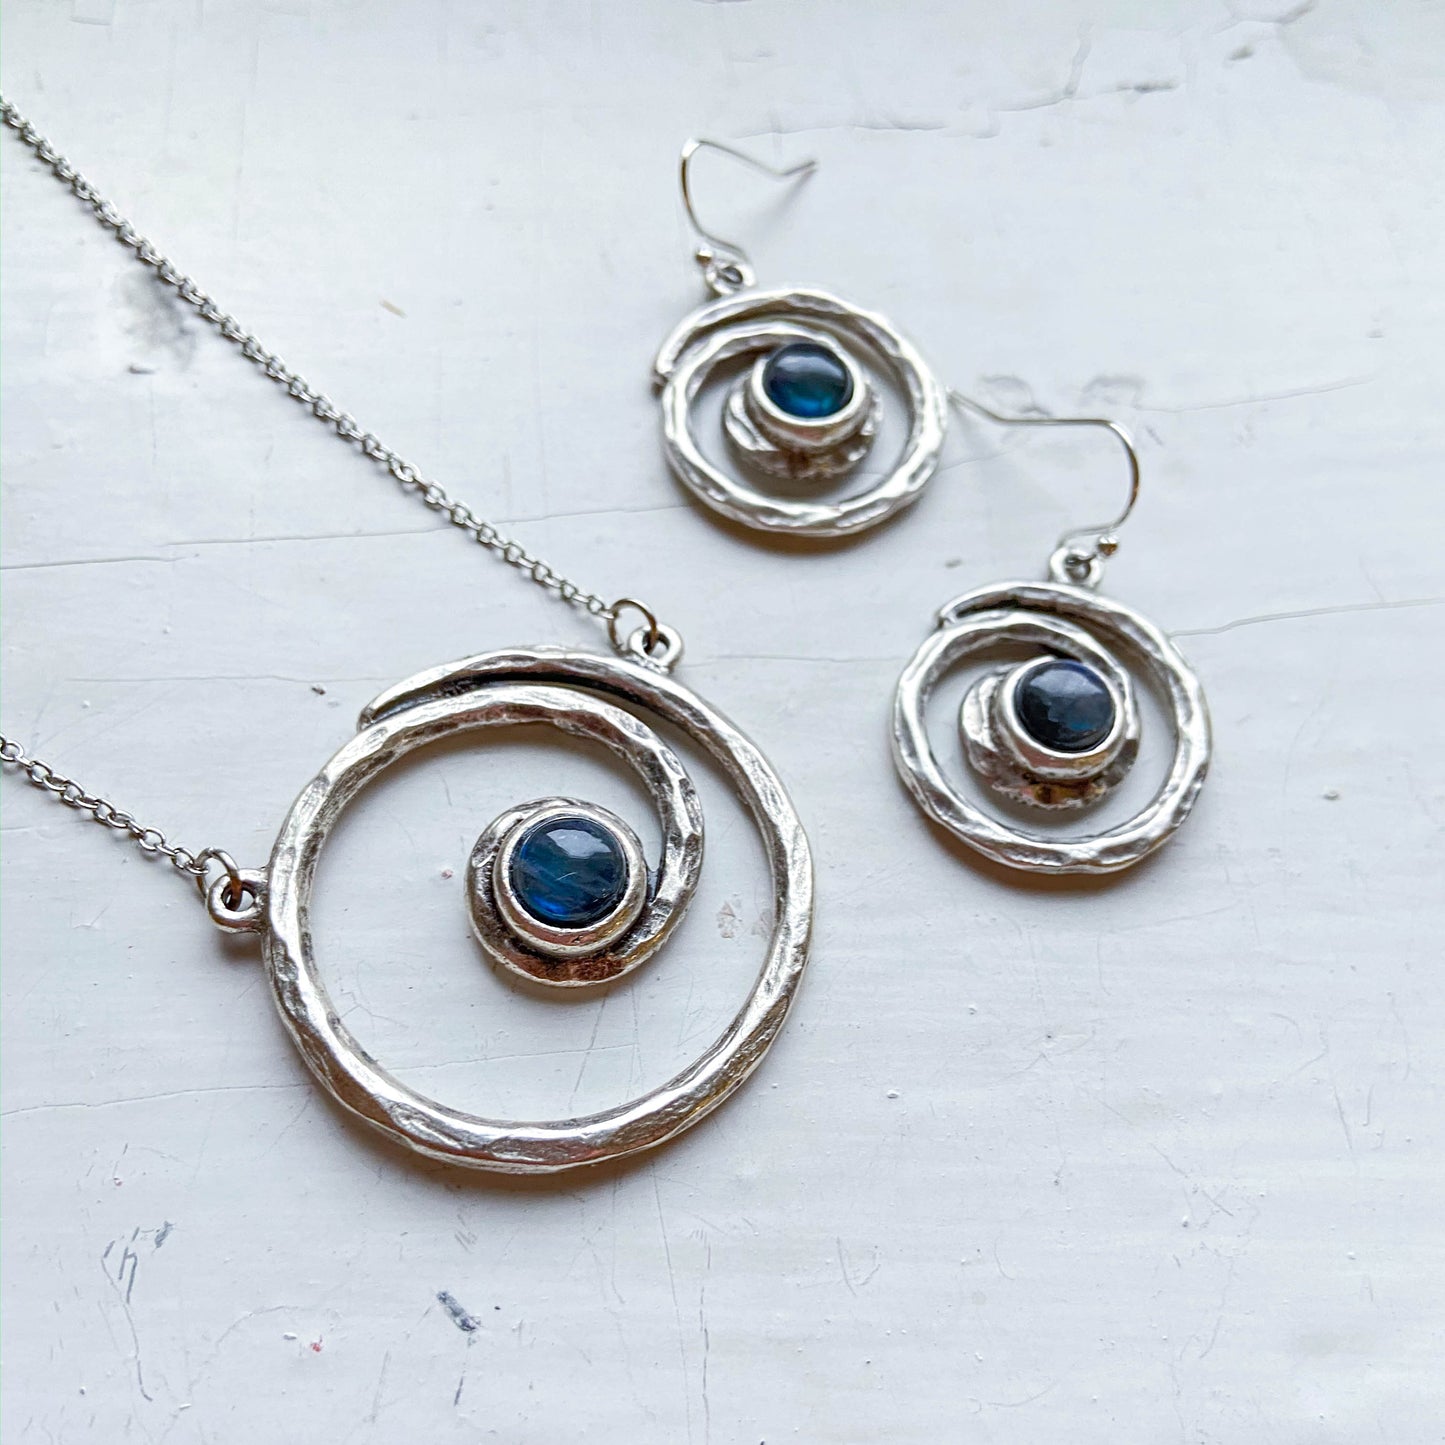 Milky Way Jewelry Set - Spiral Silver Necklace and Earrings with Labradorite Jewelry Set Yugen Handmade   